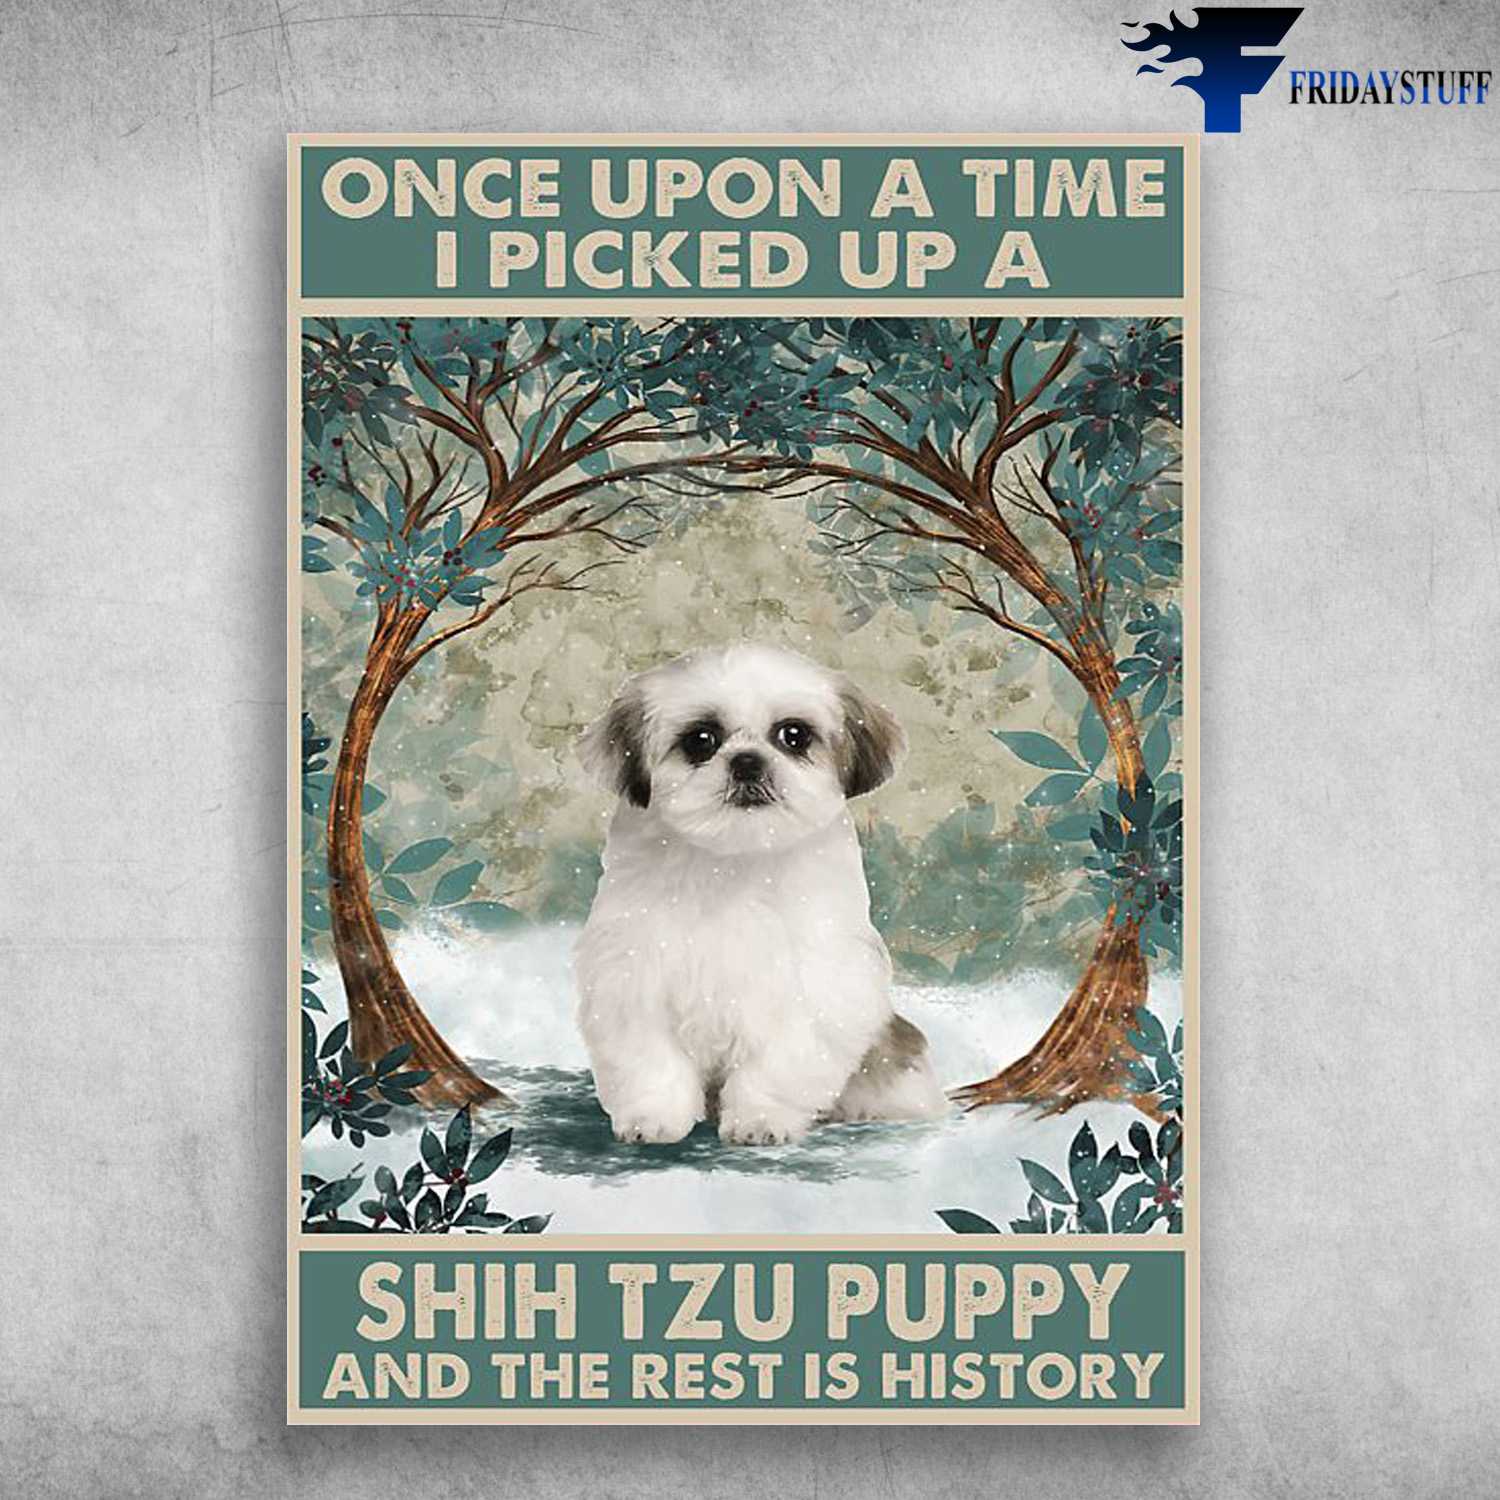 Shih Tzu Dog - One Upon A Time, There Was A Shih Tzu Puppy, And The Rest Is History